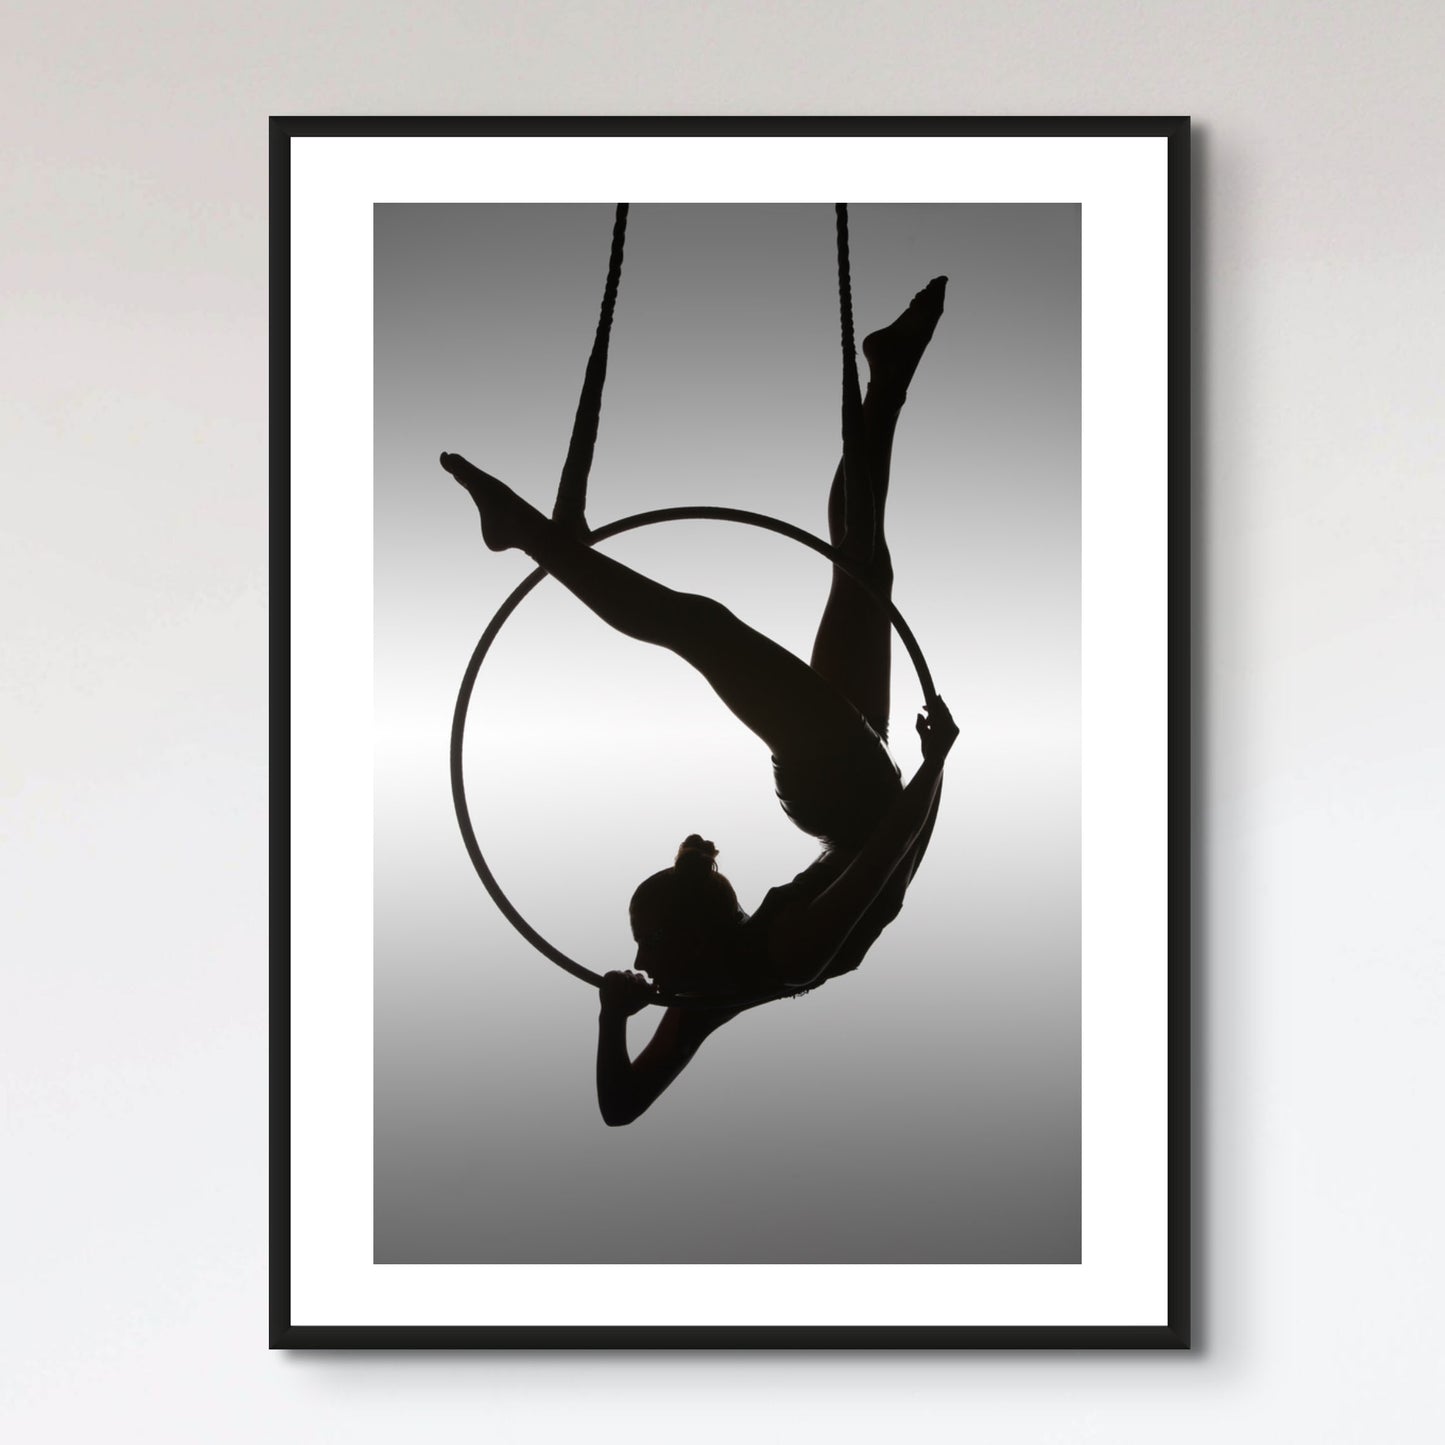 The Aerialist